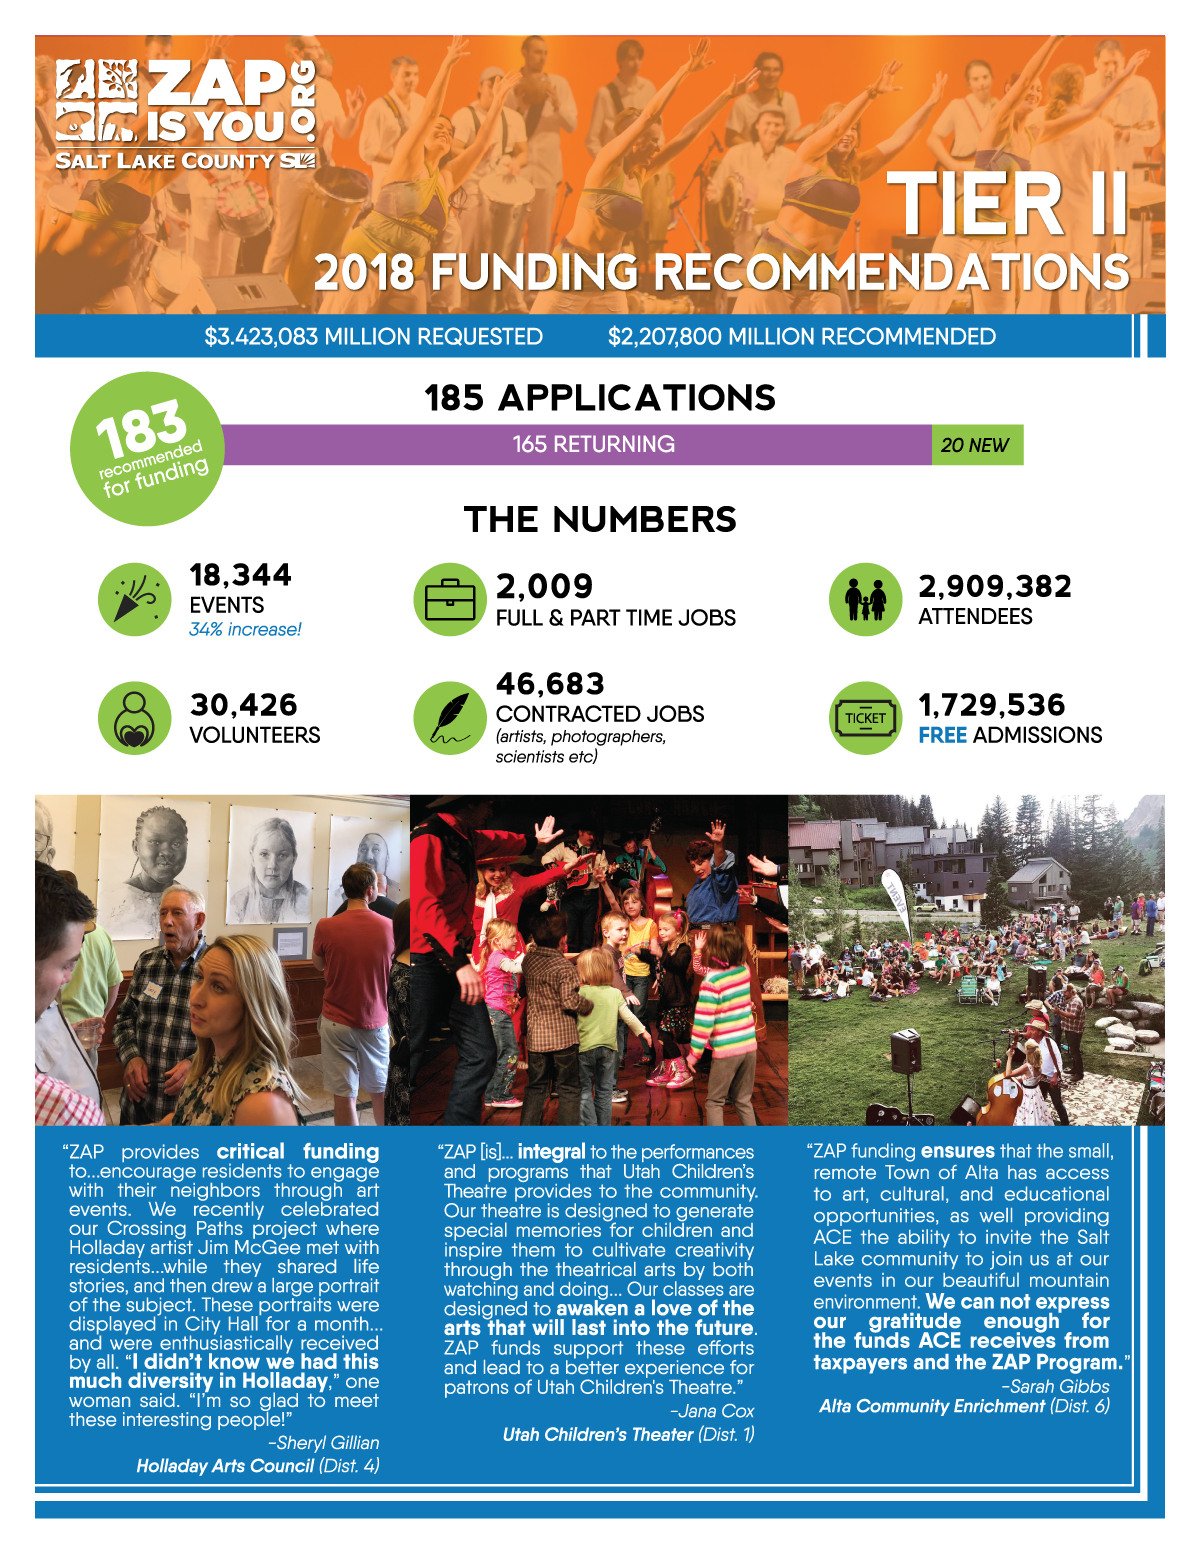 Tier II Funding At A Glance